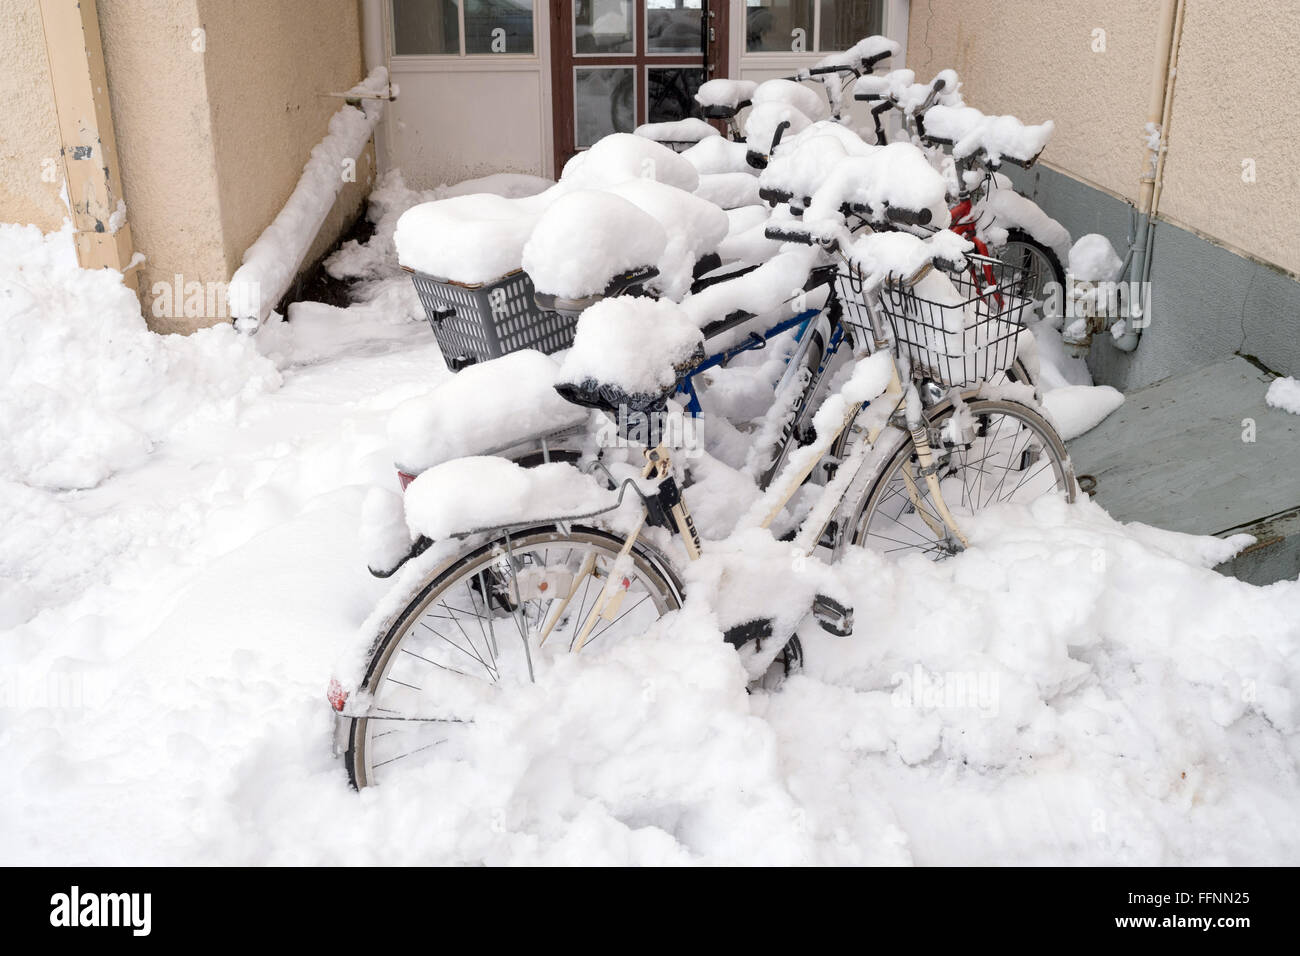 Rovaniemi, Finland. 13th Feb, 2016. Snow-covered bicycles can be seen before the entrance to a house in Rovaniemi, Finland, 13 February 2016. Photo: Peter Endig - NO WIRE SERVICE -/dpa/Alamy Live News Stock Photo